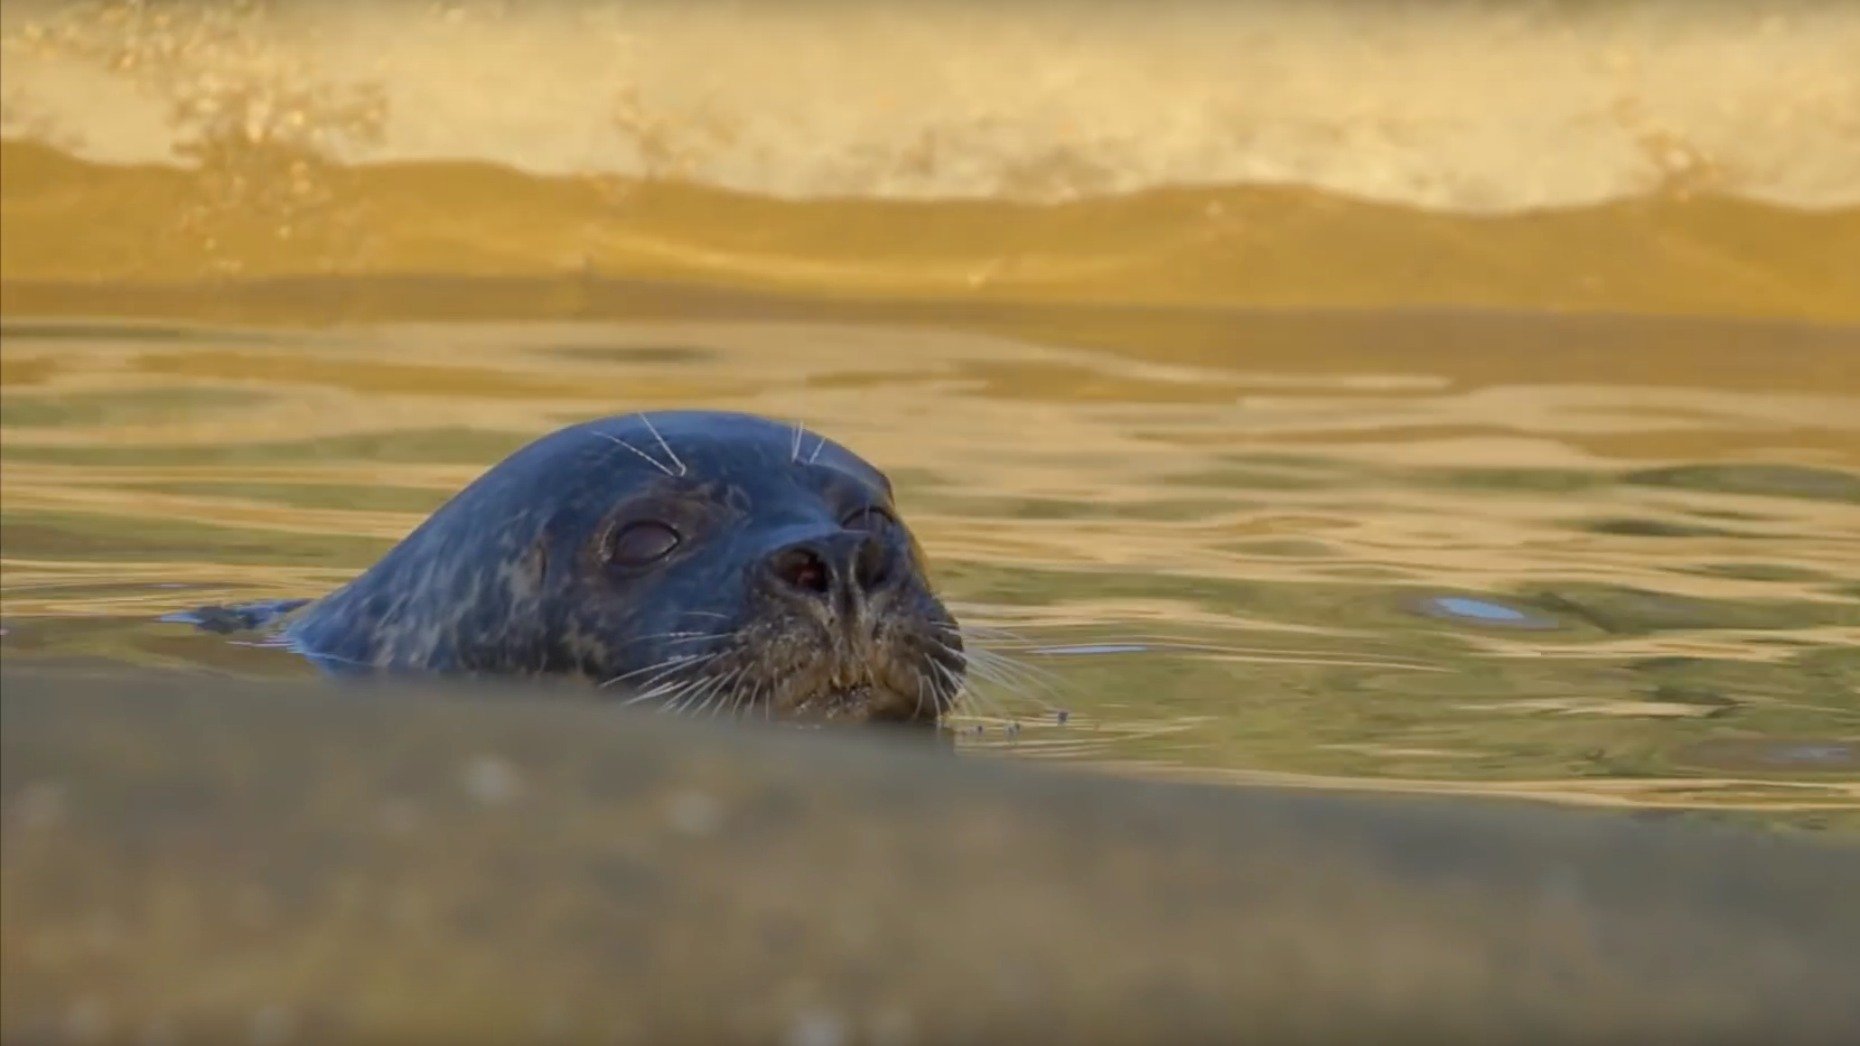 Photo: Mablethorpe seal sanctuary and wildlife centre video screenshot